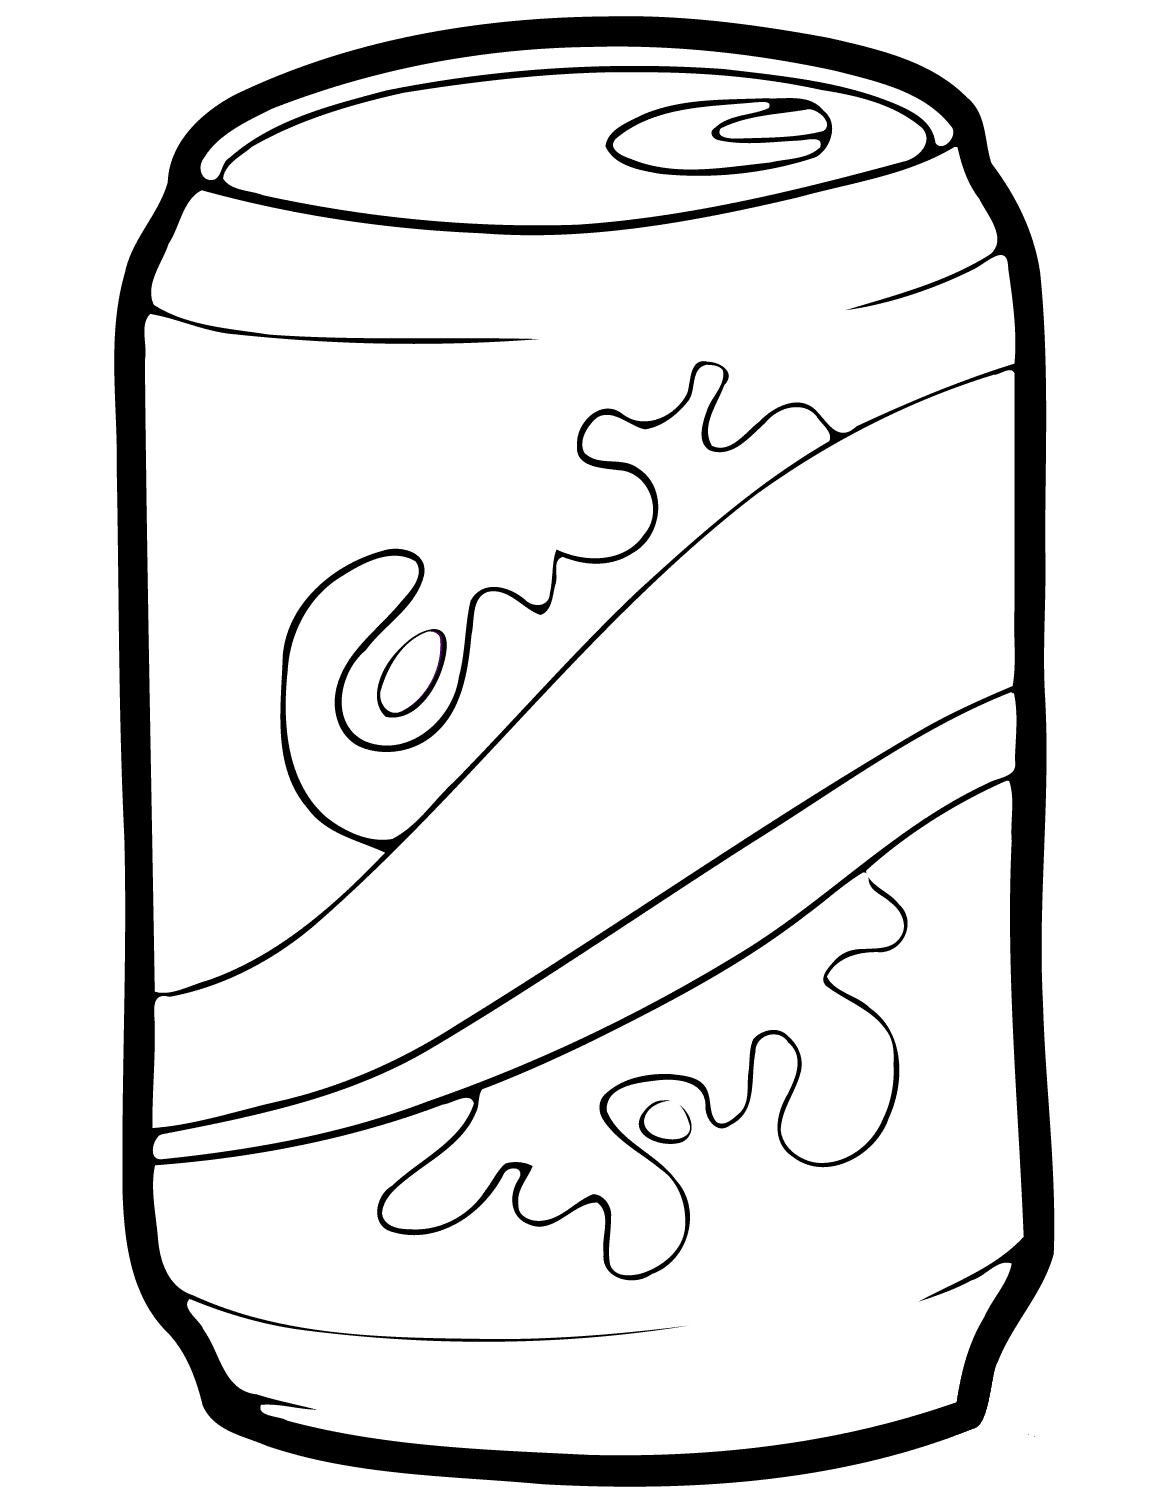 Cola Can coloring page - ColouringPages